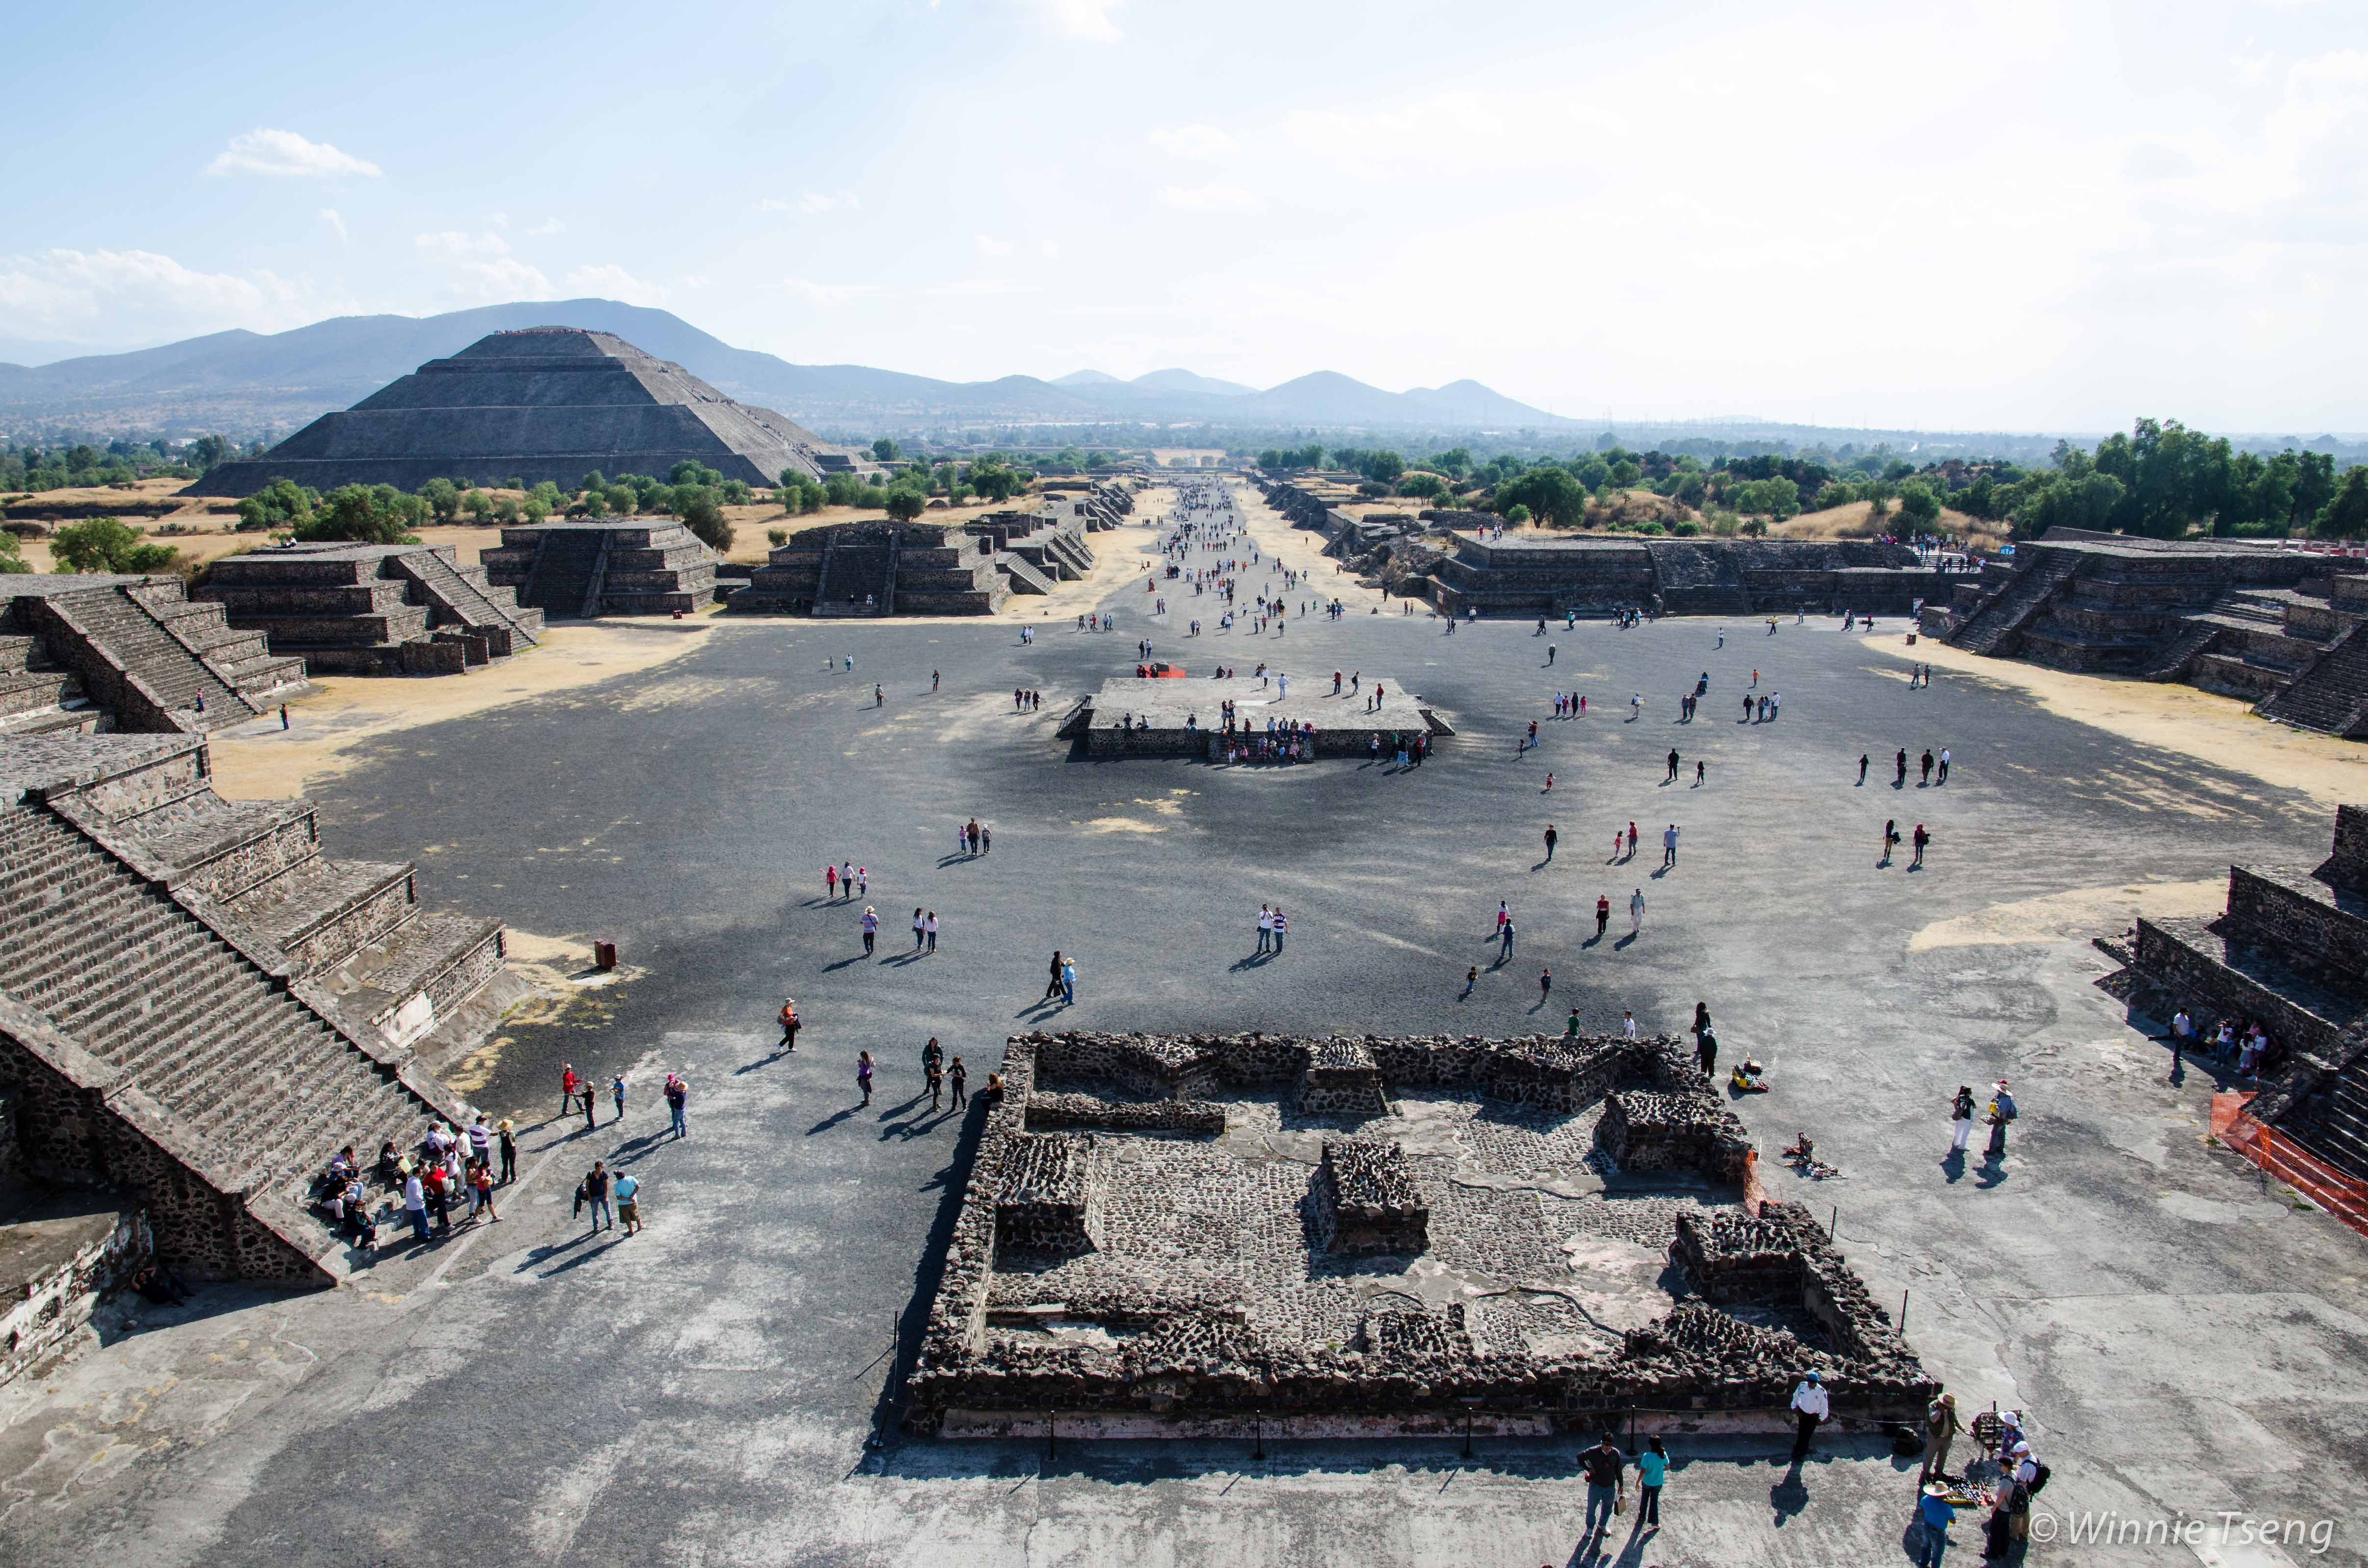 View from the top of the Pyramid of the Moon, back along the Avenue of the Dead